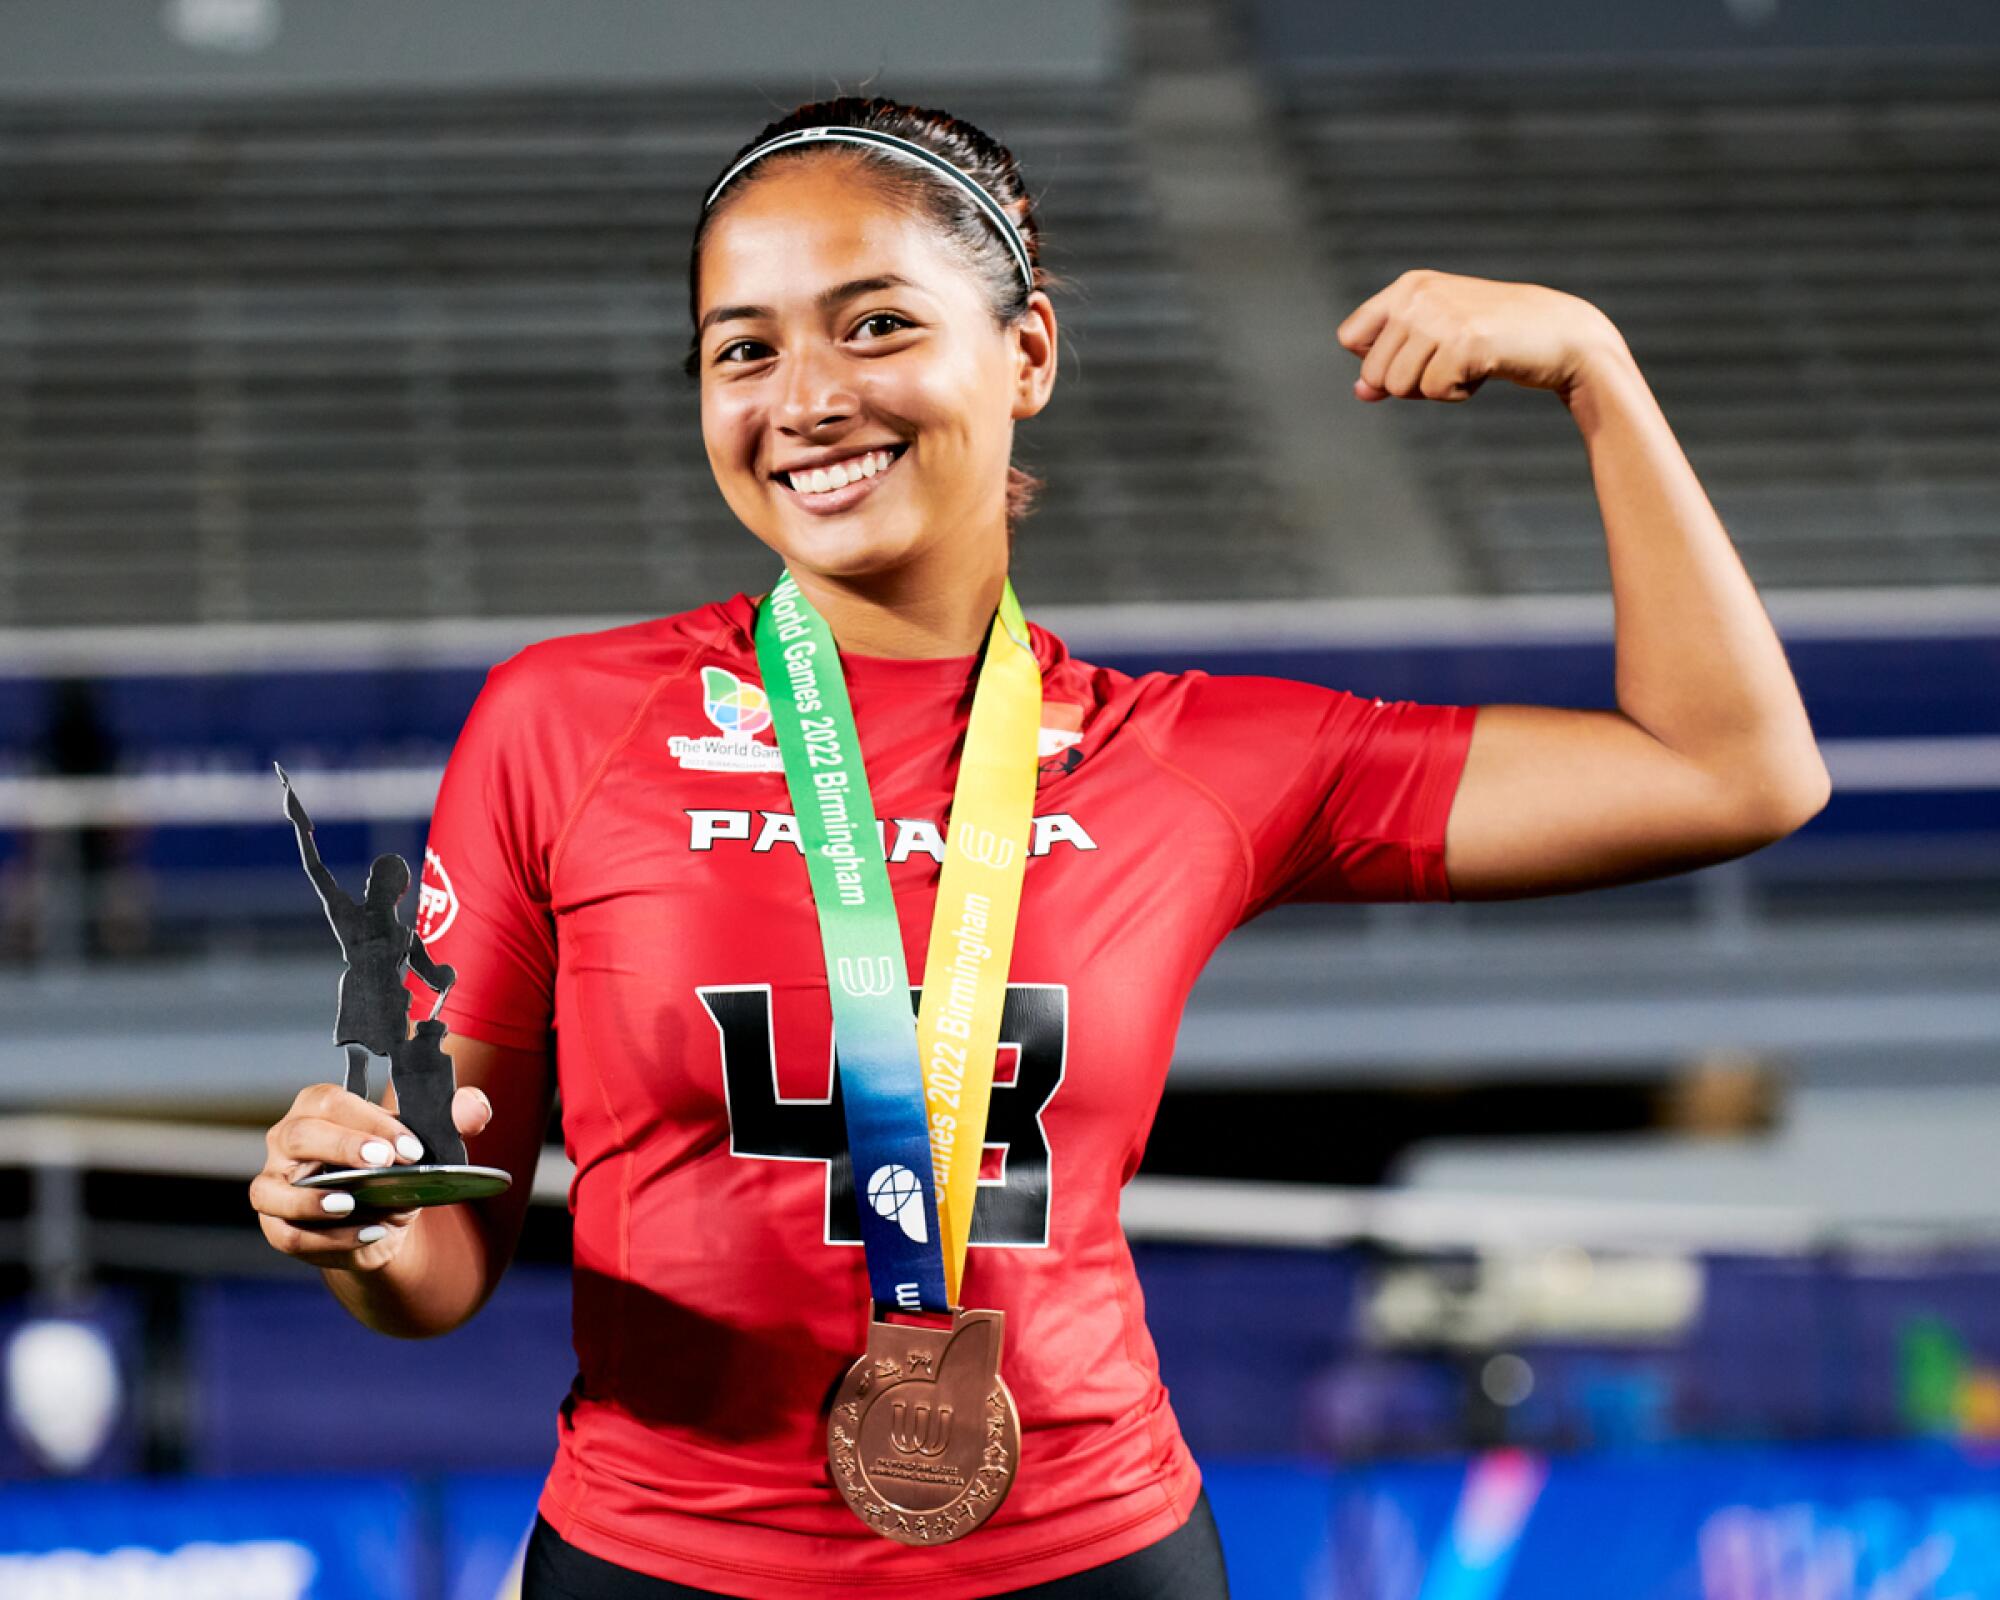 Andrea Castillo celebrates after helping Panama win a bronze medal in flag football at the World Games 2022.